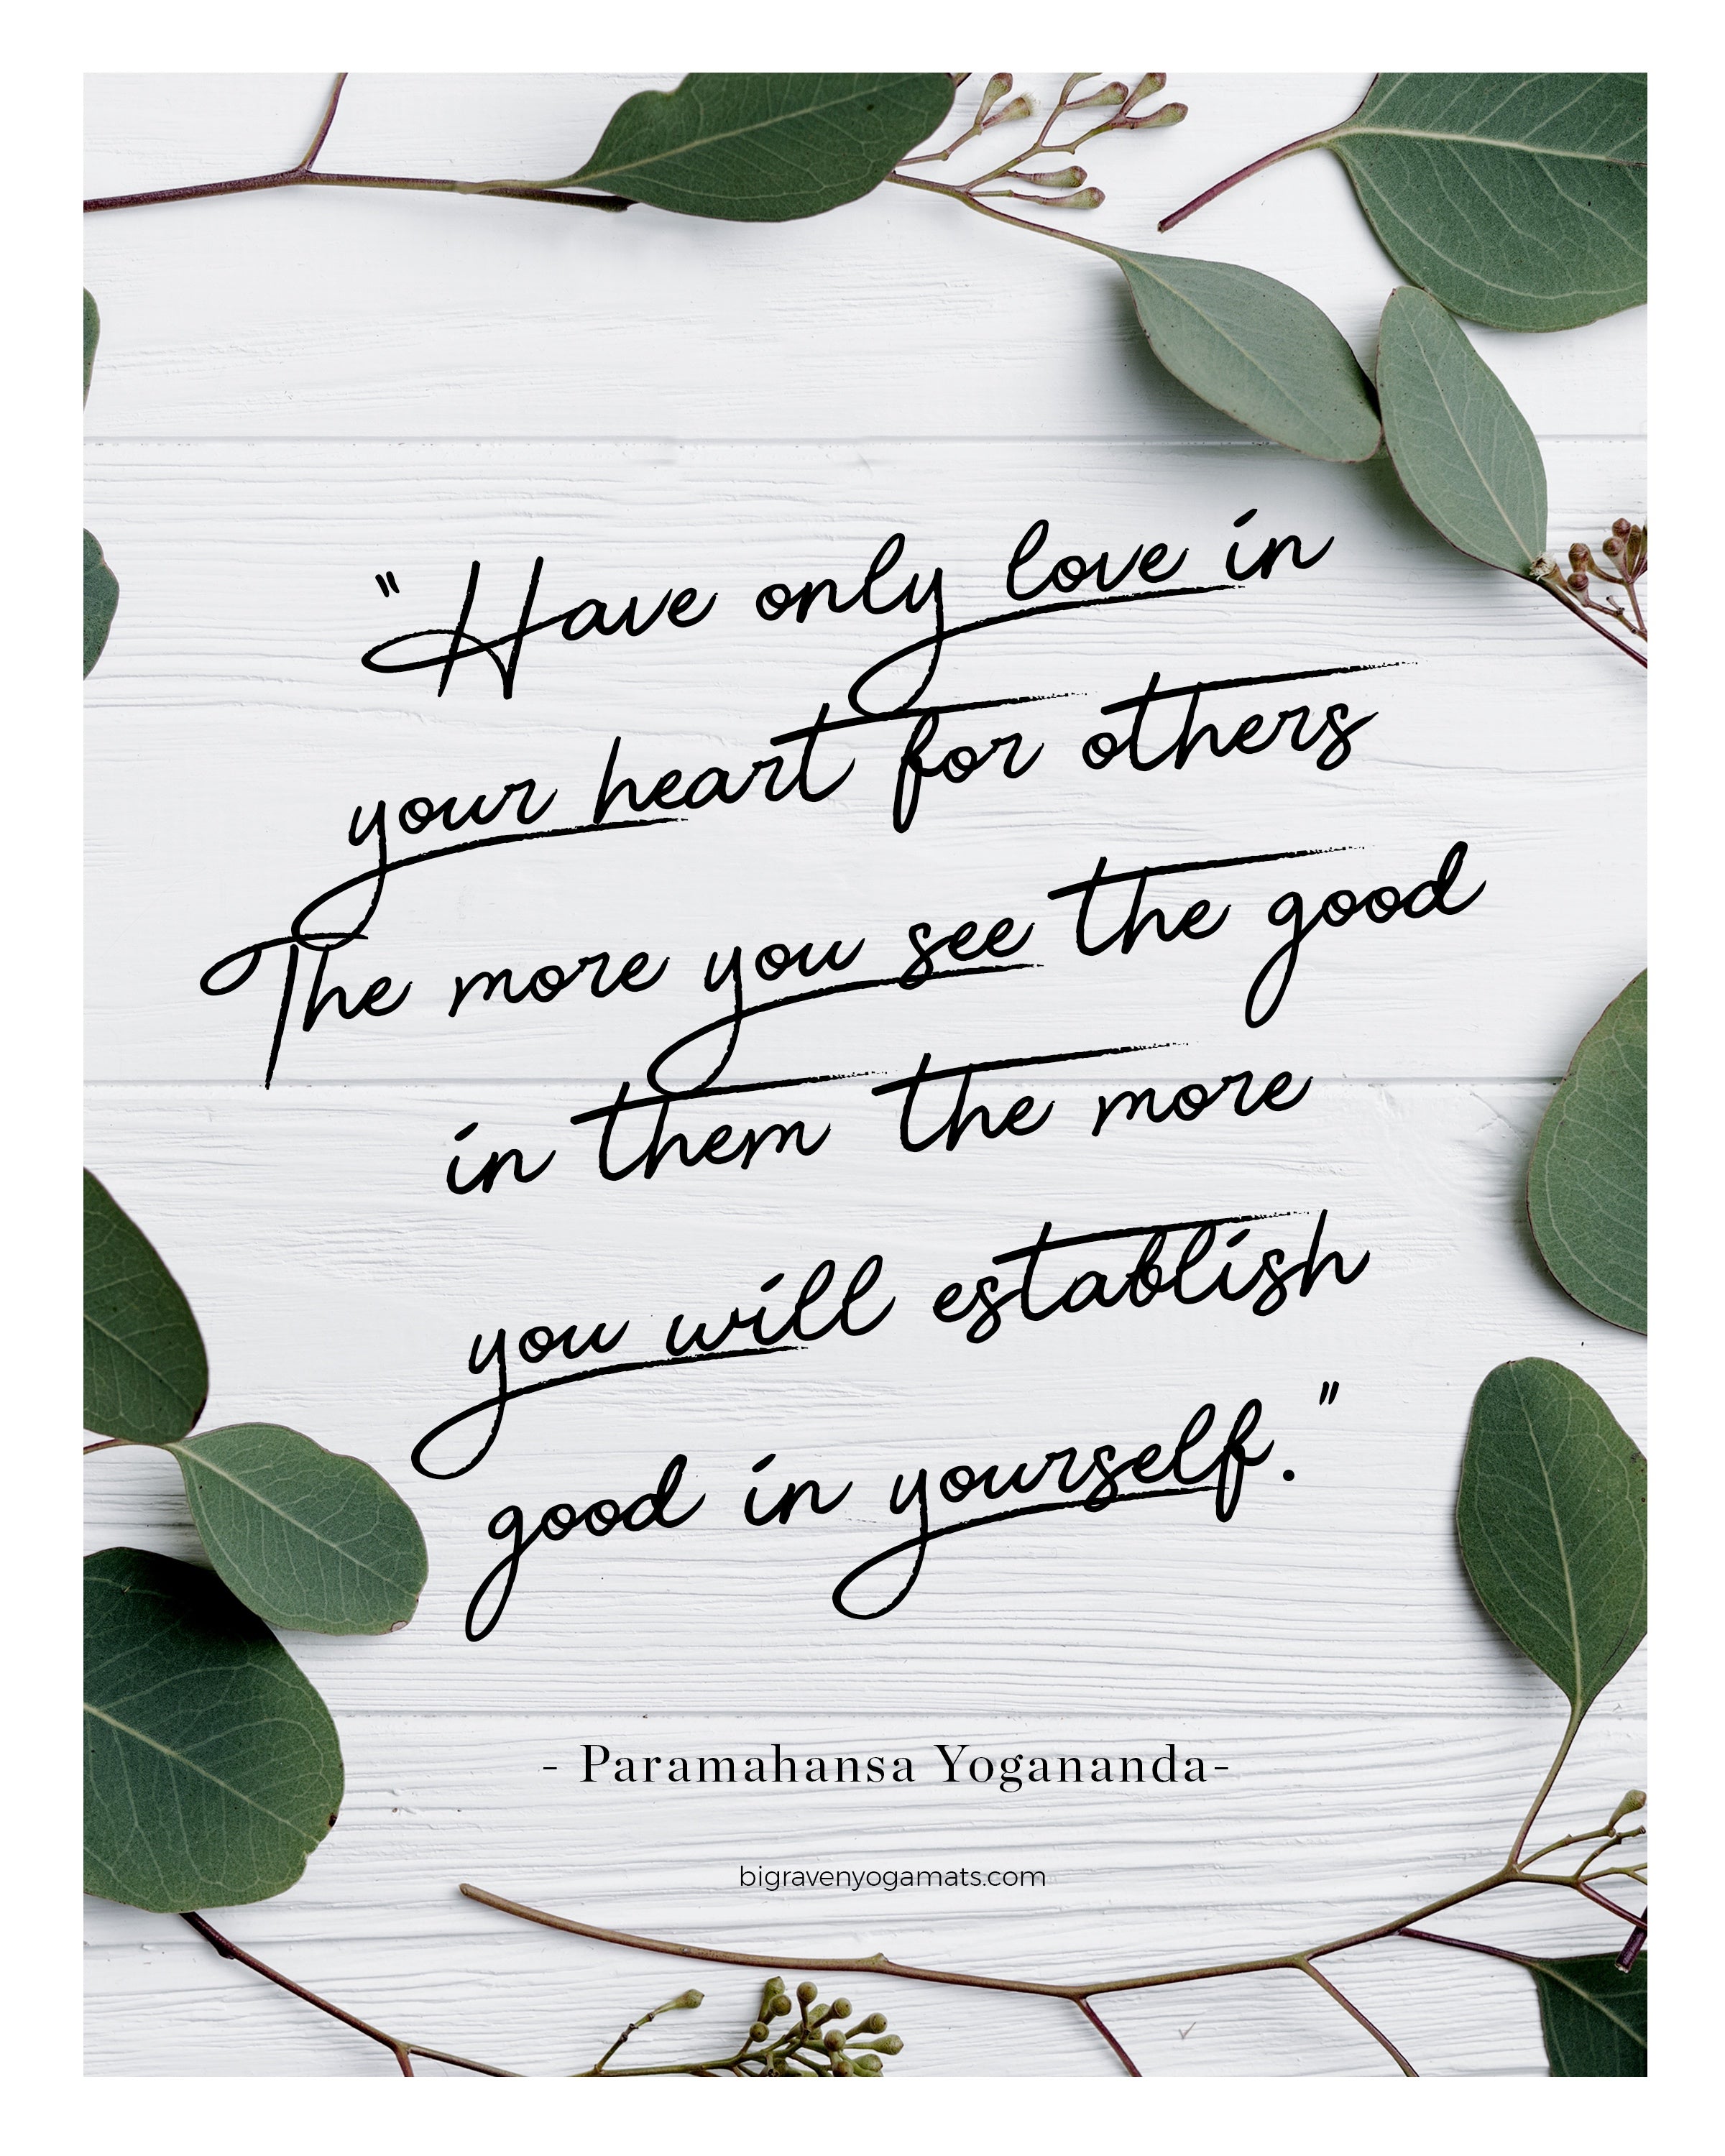 Have only love in your heart for others. The more you see the good in them the more you will establish good in yourself. Paramahansa Yogananda.